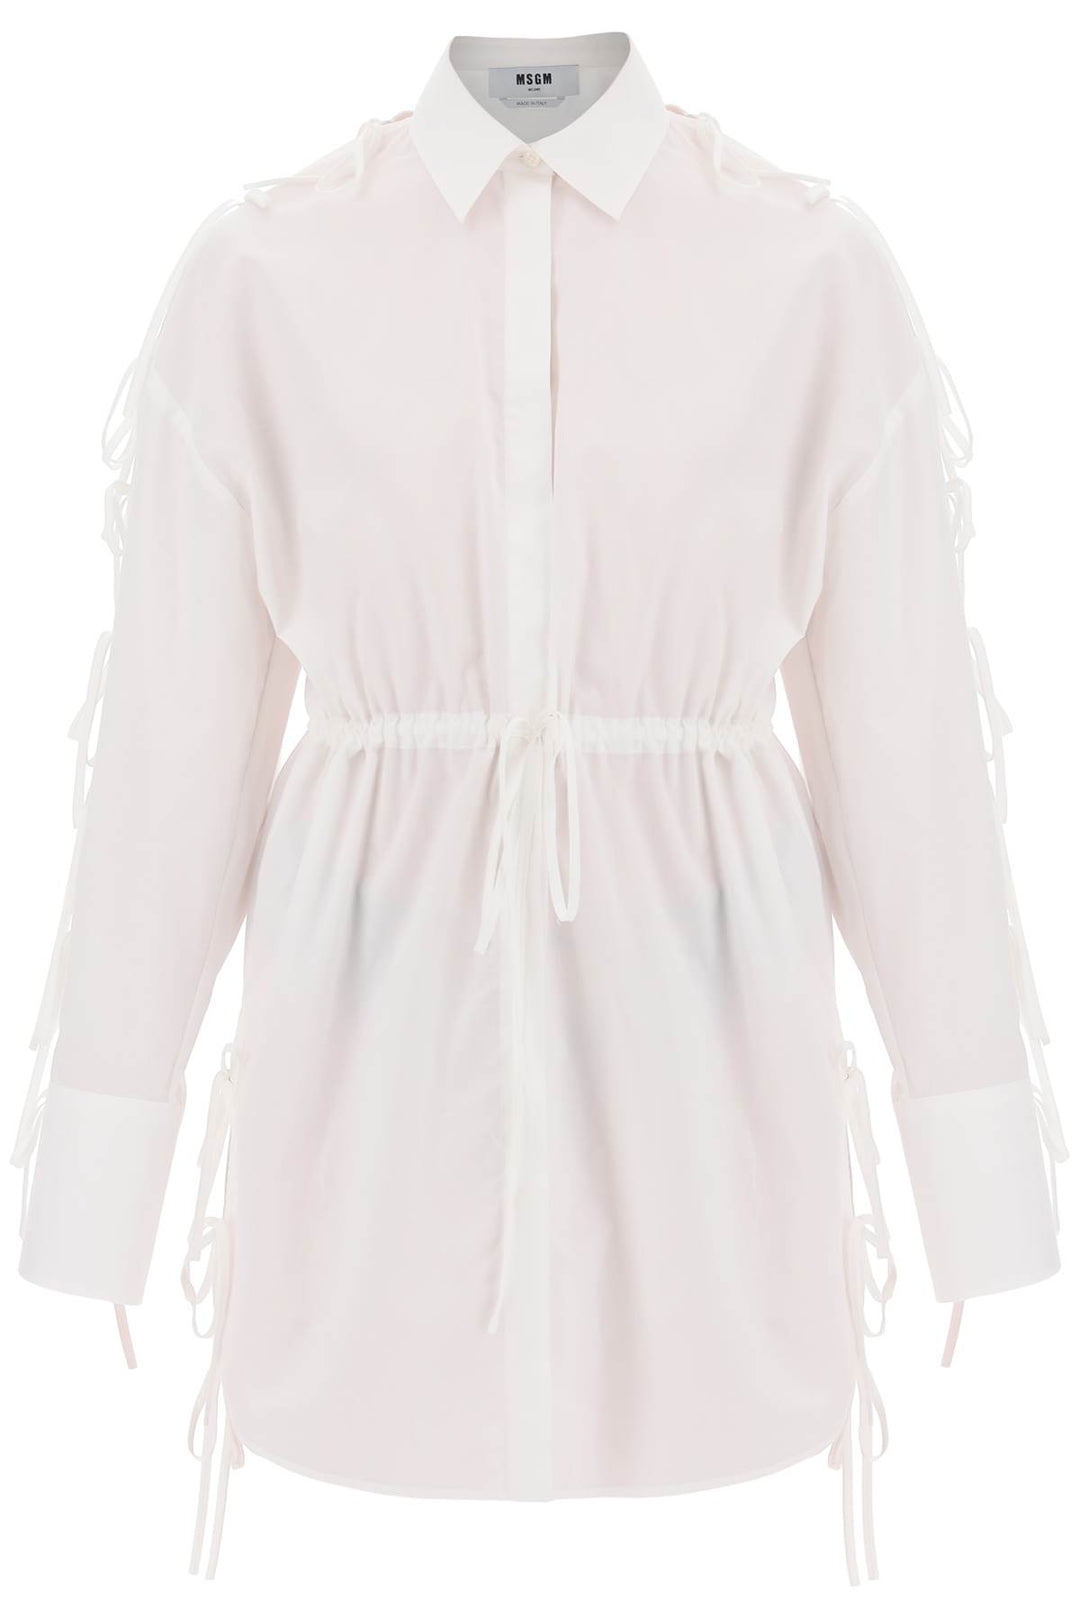 Msgm Mini Shirt Dress With Cut Outs And Bows   Bianco